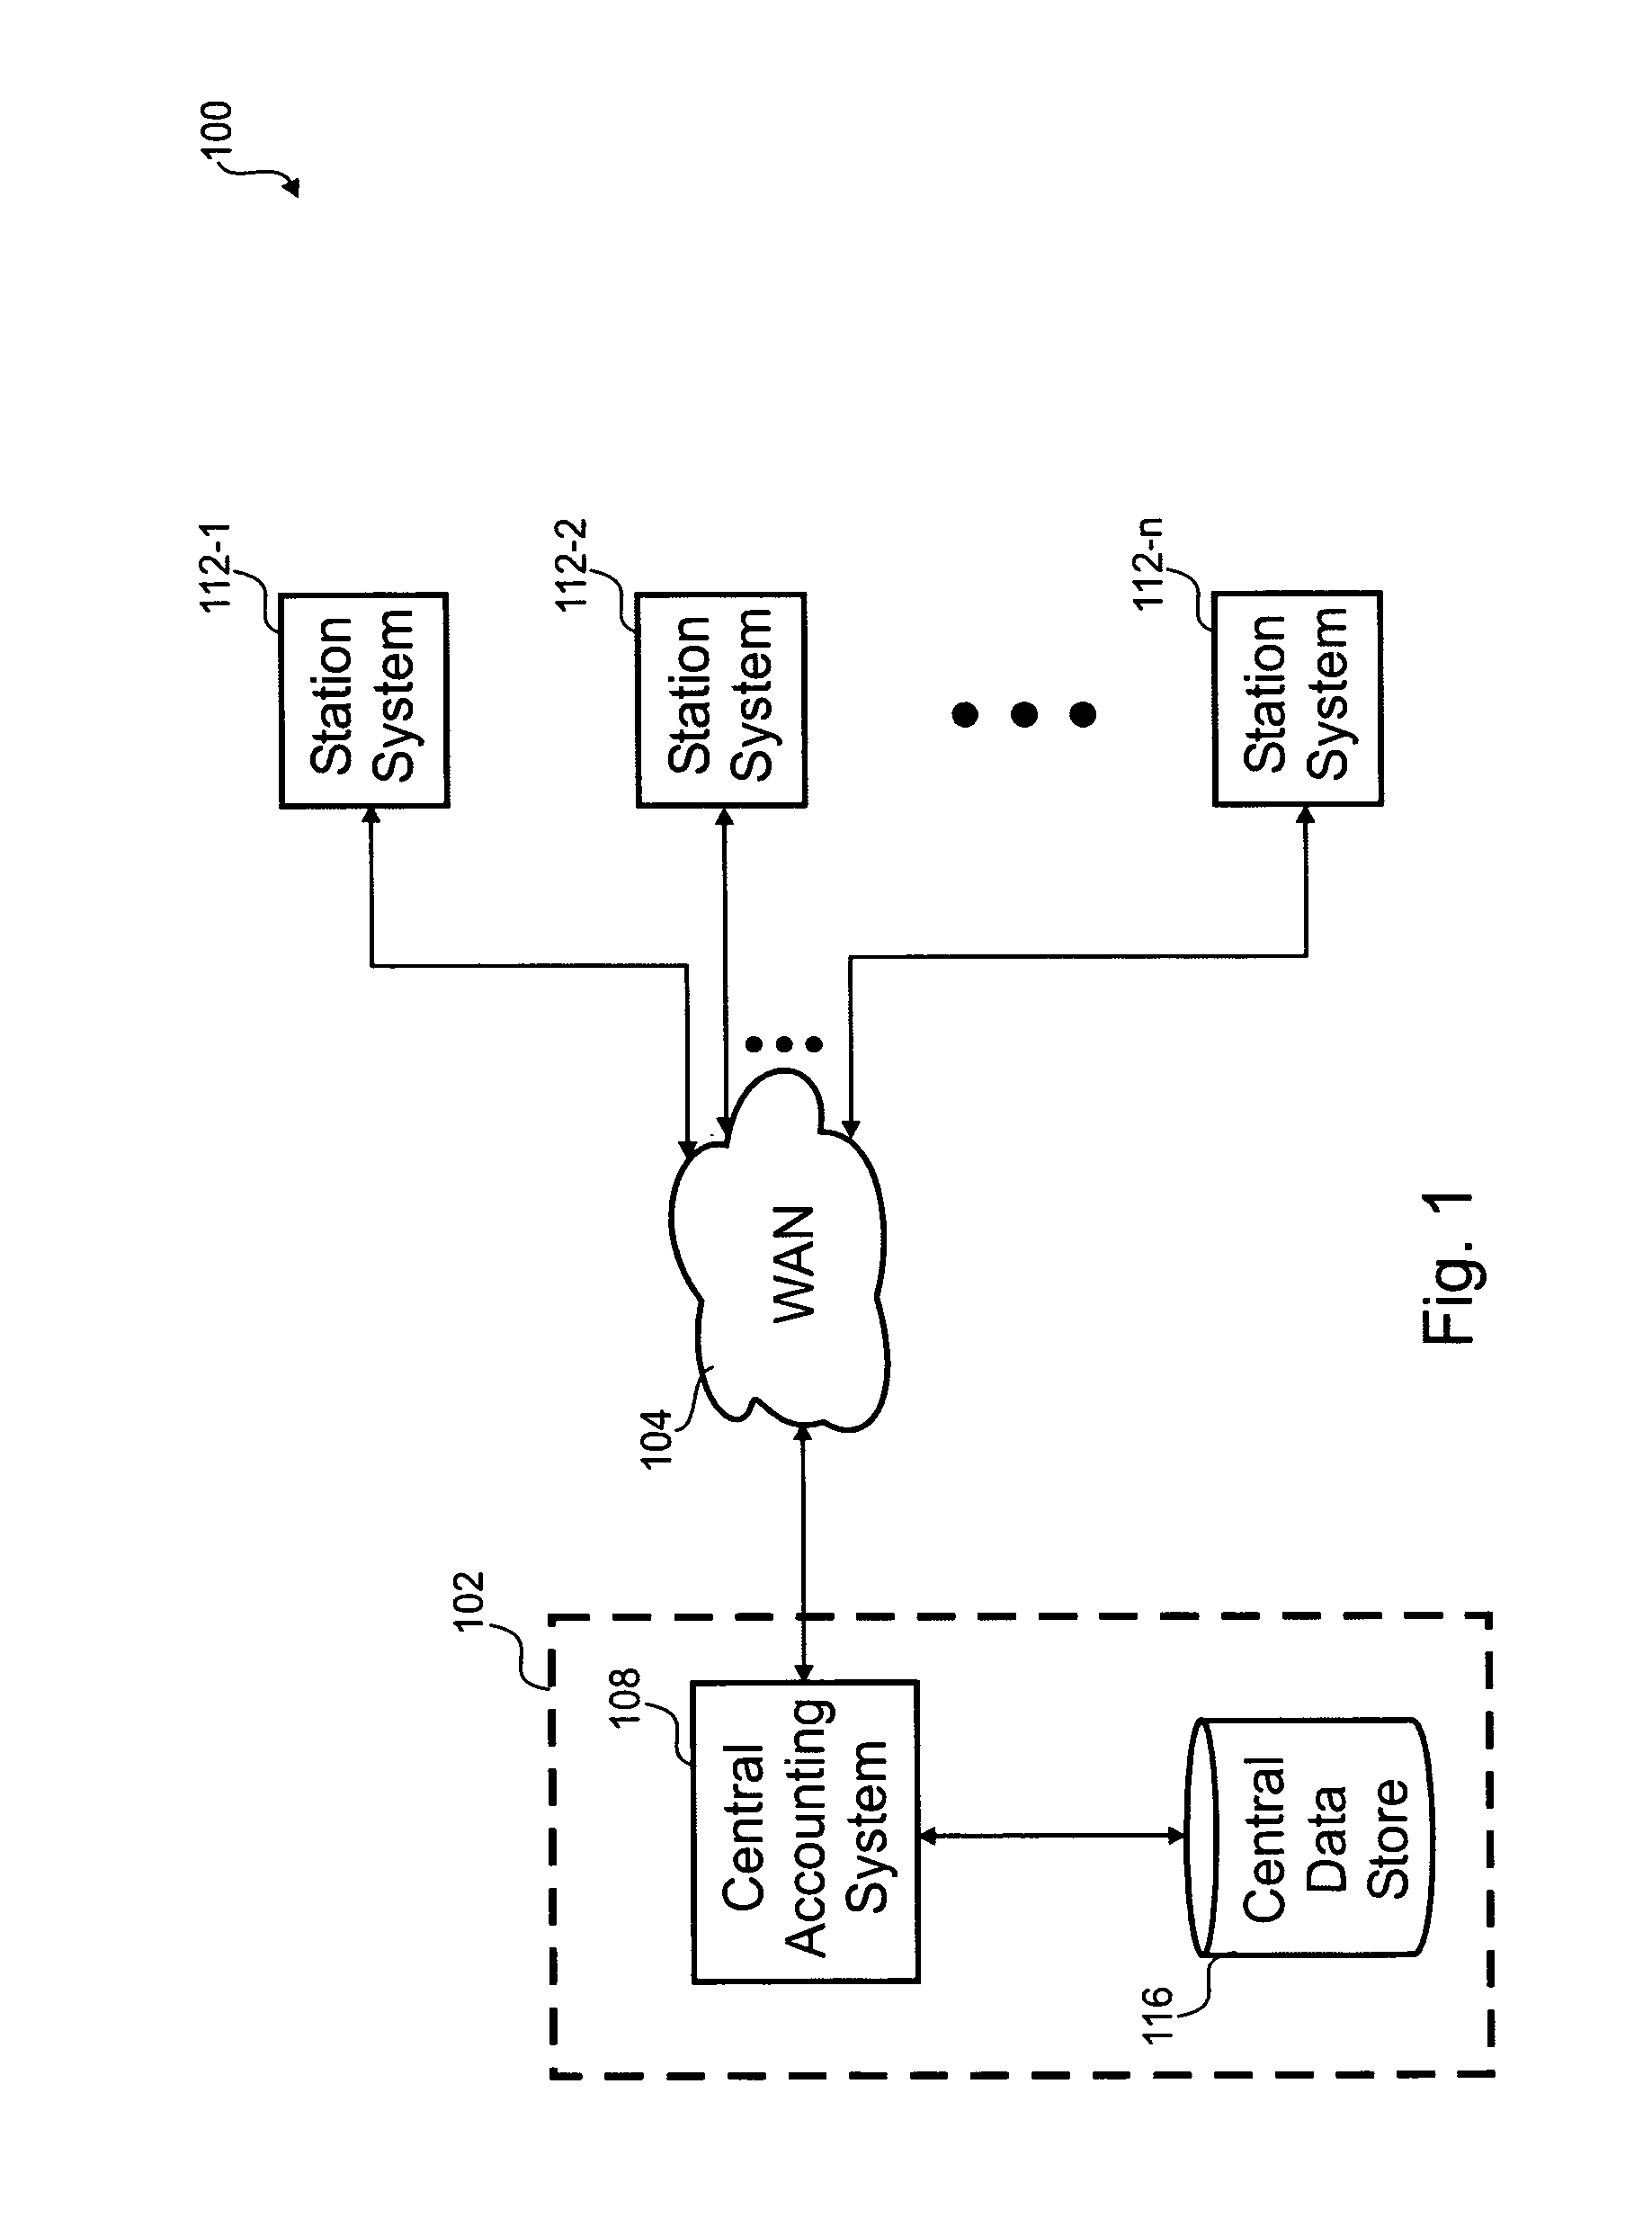 Directed autoload of contactless stored value card within a transportation system